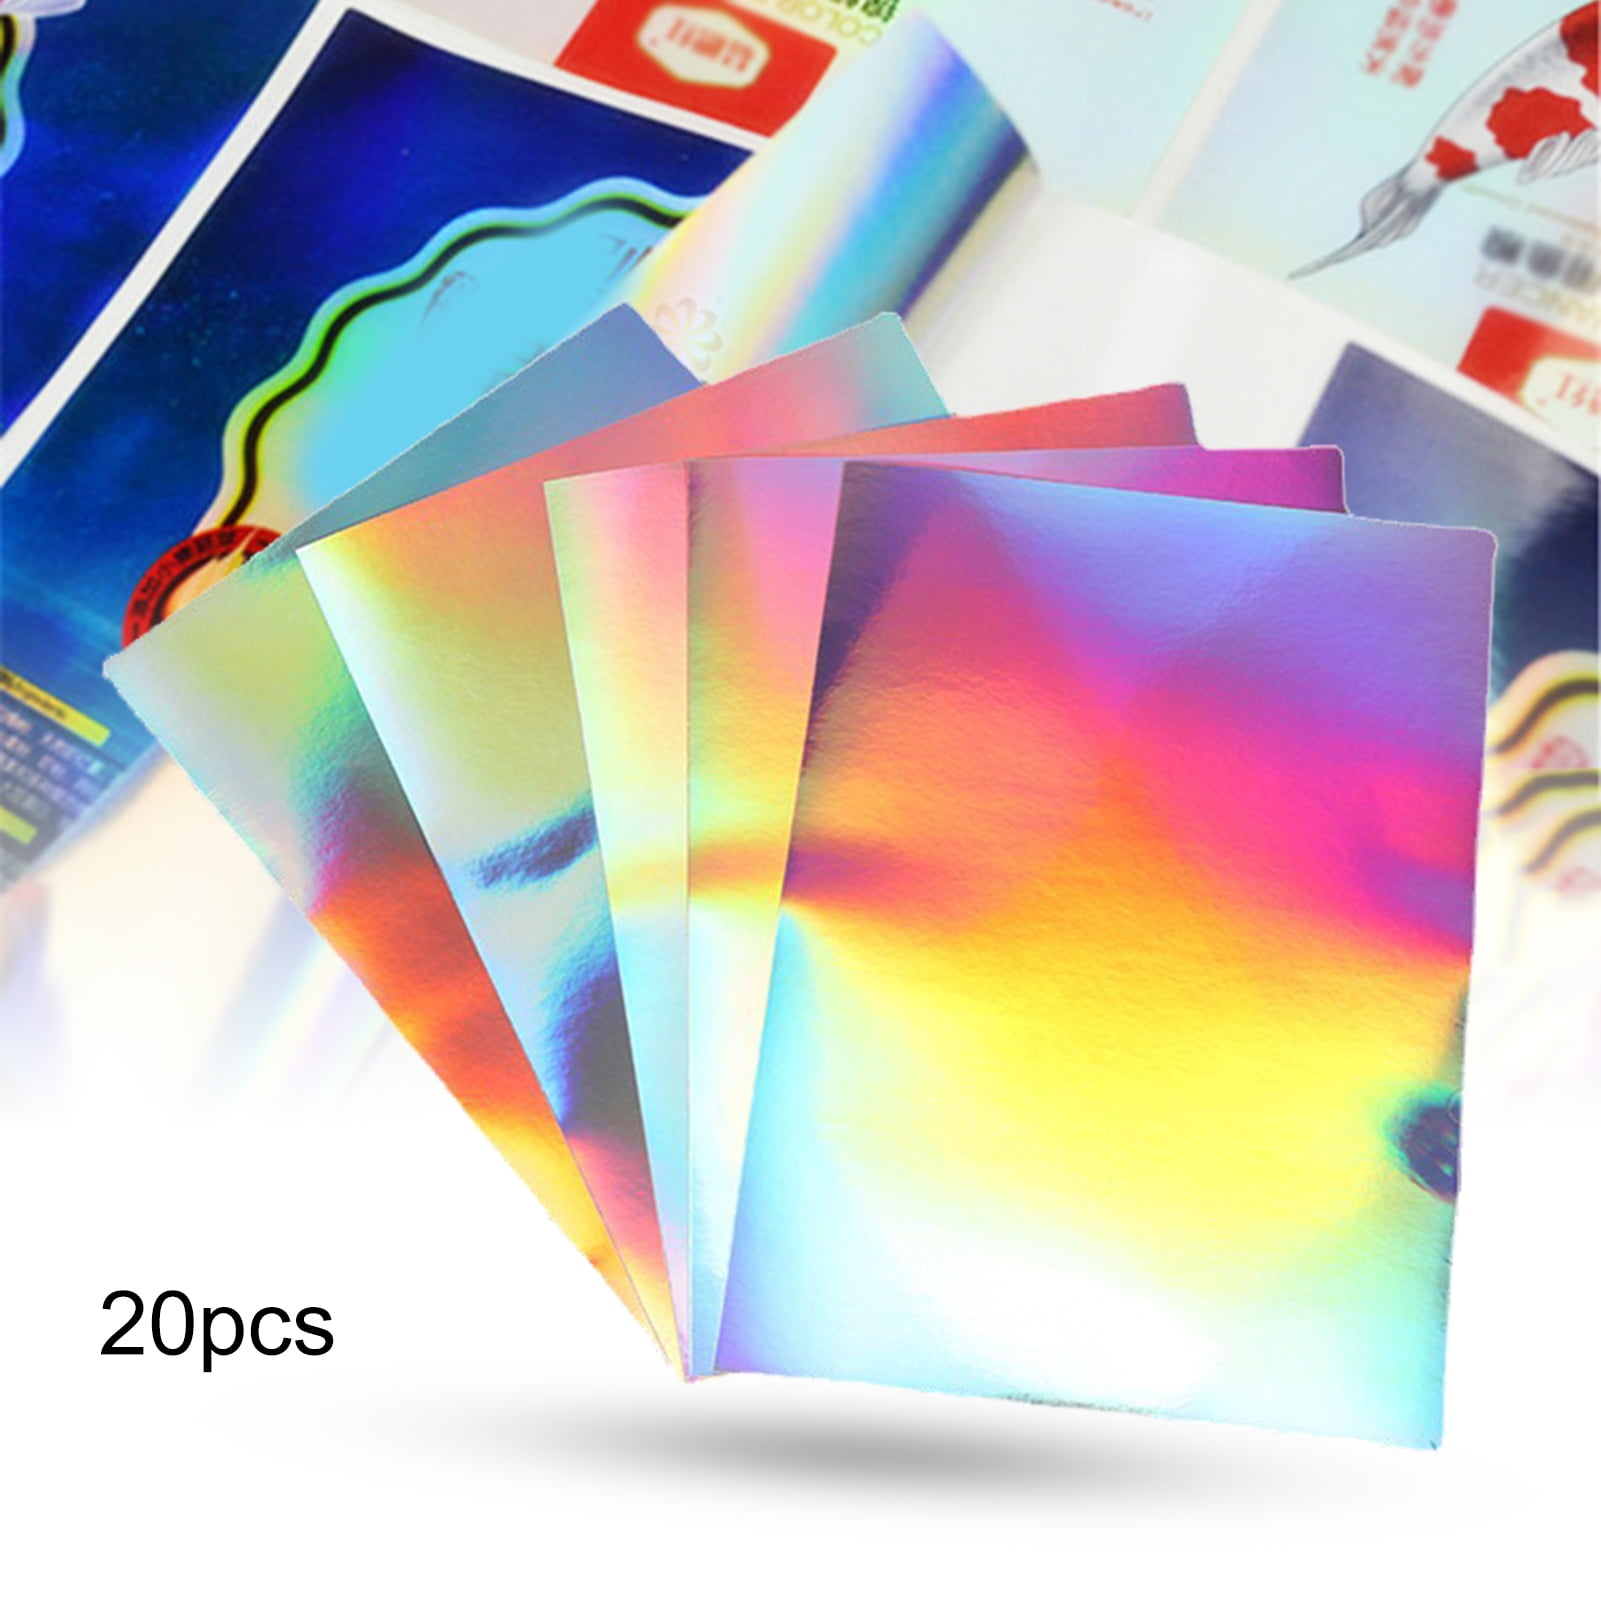  HTVRONT Sublimation Sticker Paper - 20 Pcs Glossy Transparent Waterproof  Sublimation Stickers : Arts, Crafts & Sewing